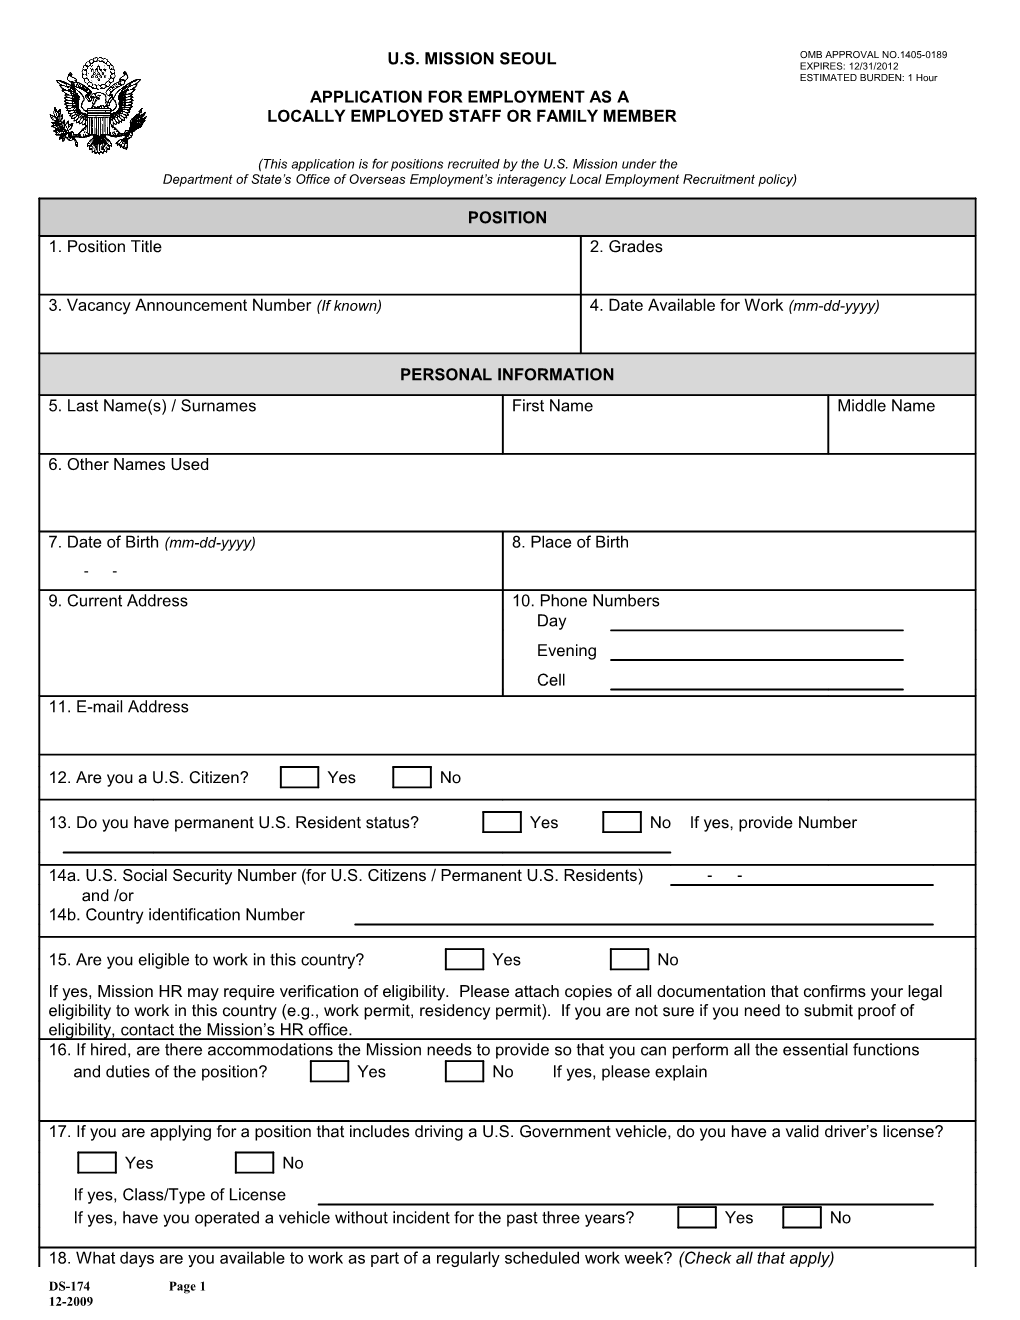 U.S. Mission Seoul Application for Employment As a Locally Employed Staff Or Family Member